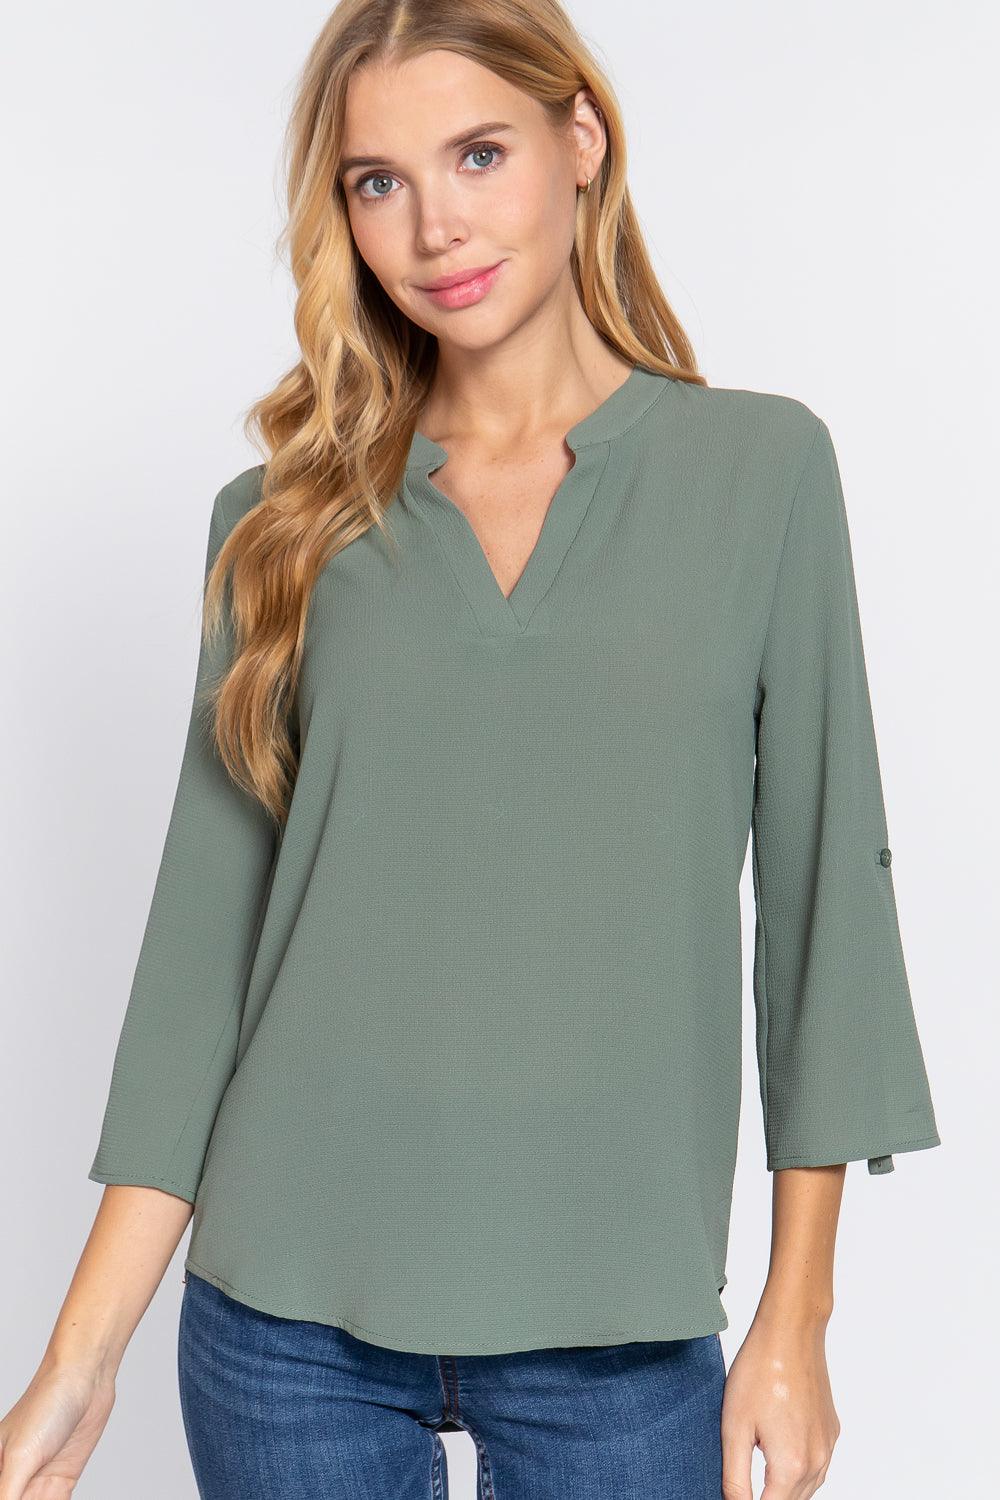 Buying Guide: Stylish and Healthy Dresses 2023 | Fashionably Fit | 3/4 Roll Up Slv Woven Blouse